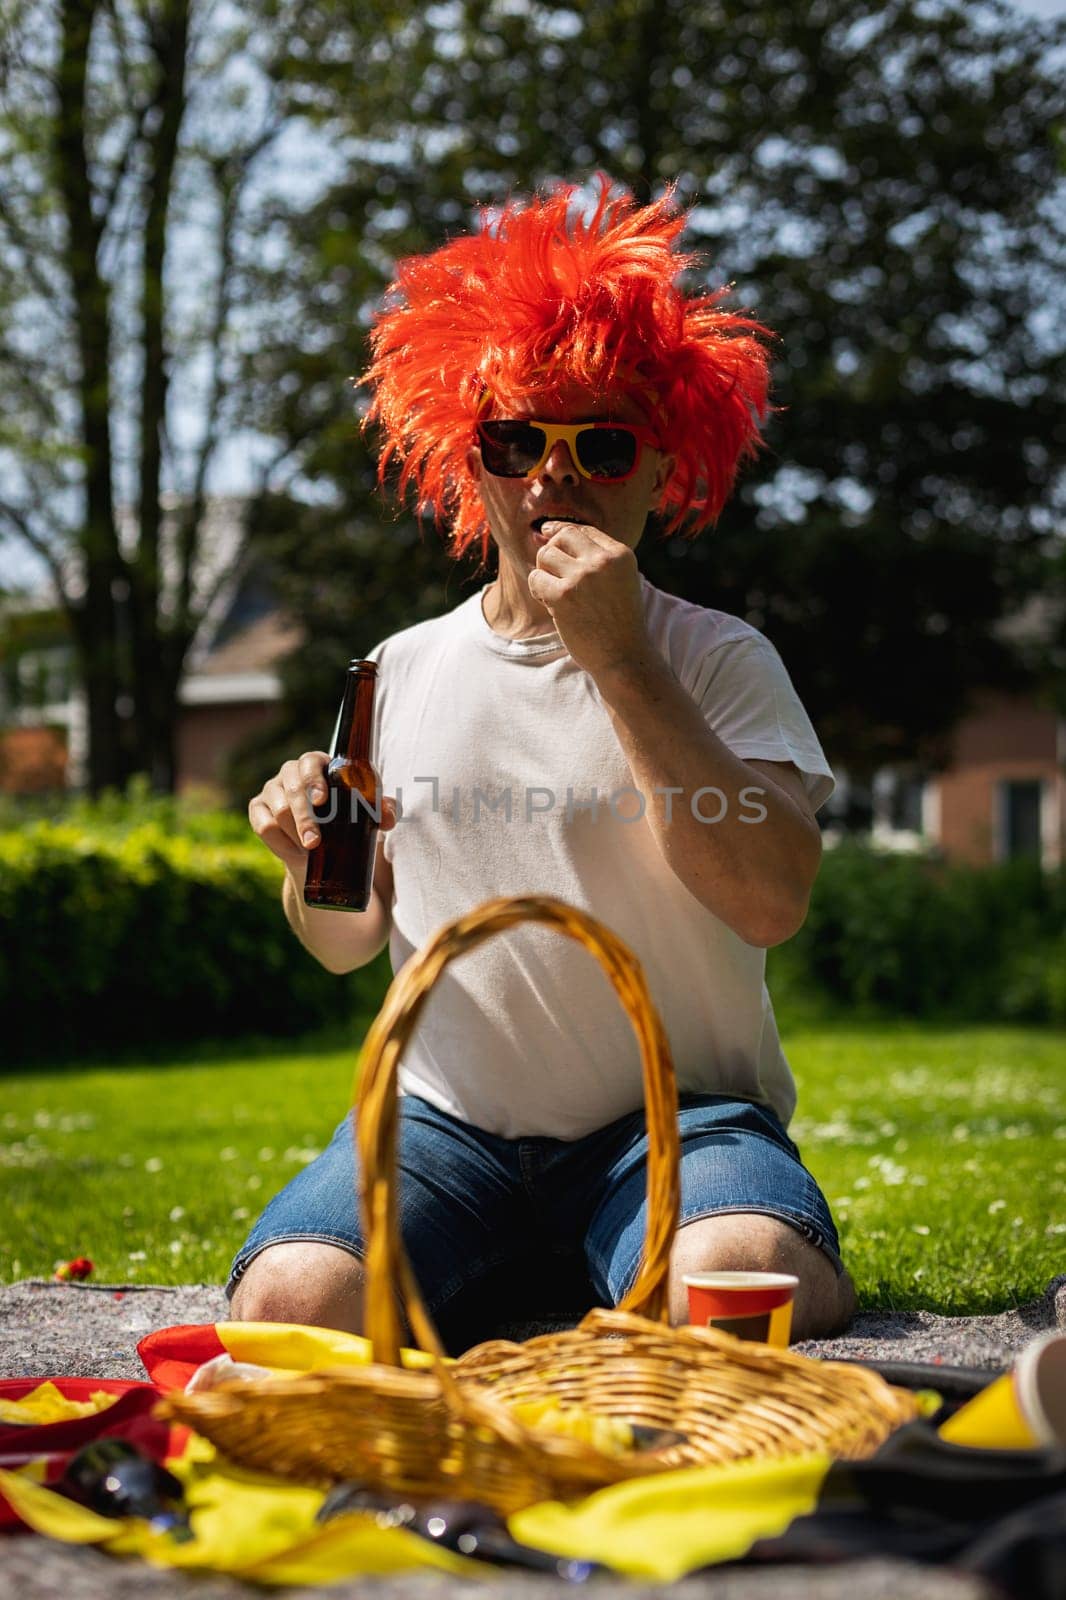 Portrait of a handsome young caucasian man in sunglasses, red wig drinking beer and eating chips celebrating belgium day at a picnic in a city park on a sunny summer day, close up side view.